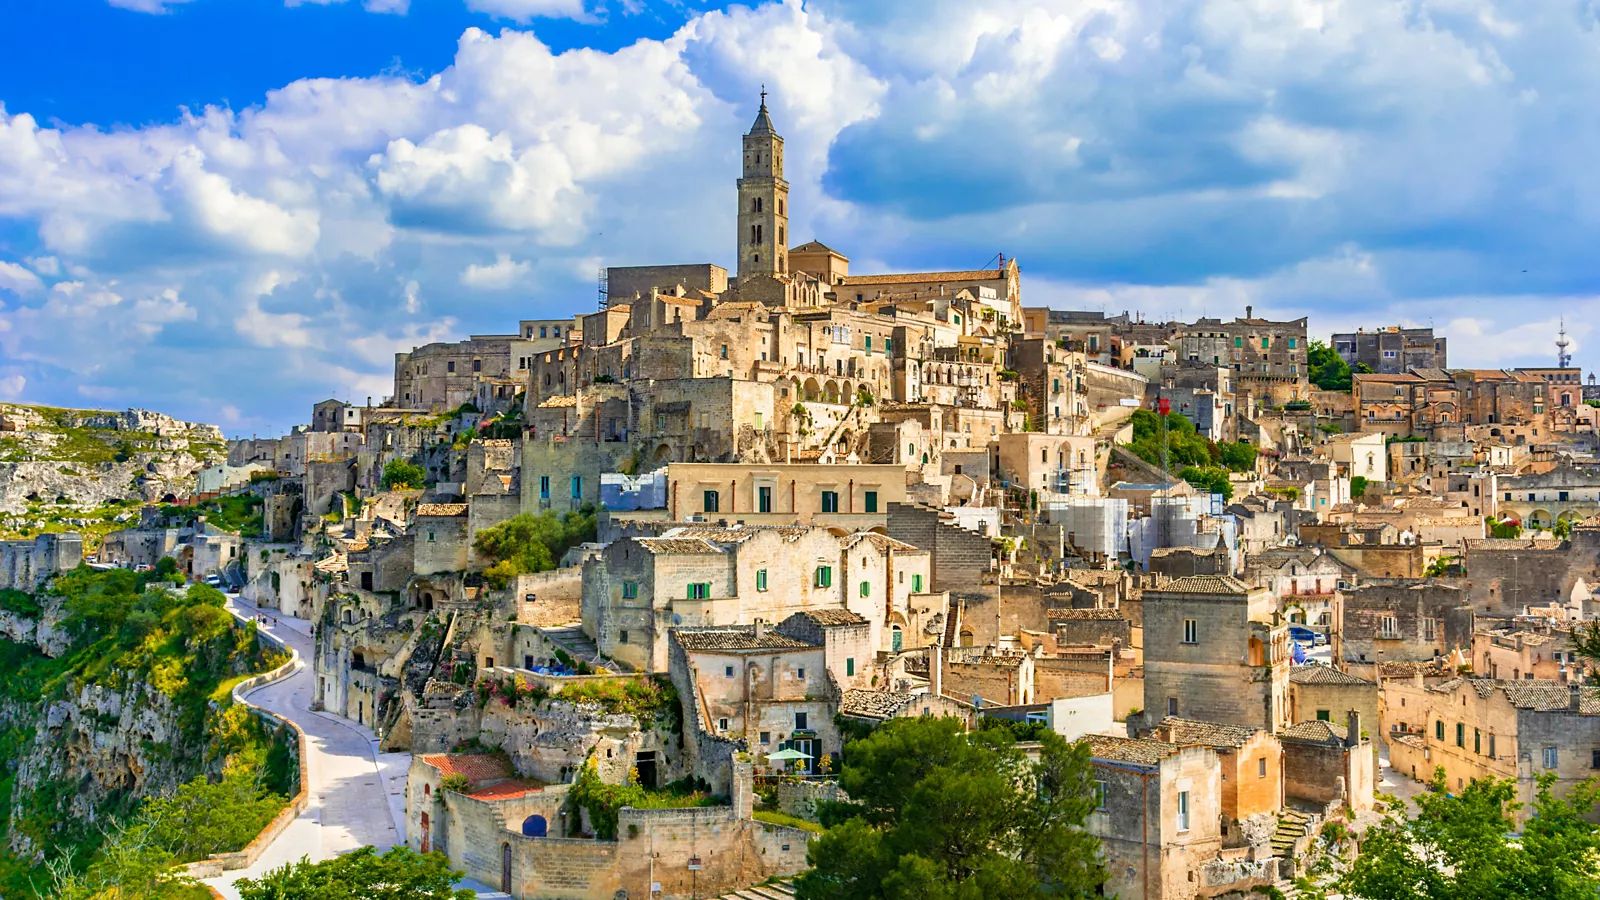 20210406102756 Matera Giorno Basilicata Gettyimages 971736354?wid=1600&hei=900&fit=constrain,1&fmt=webp